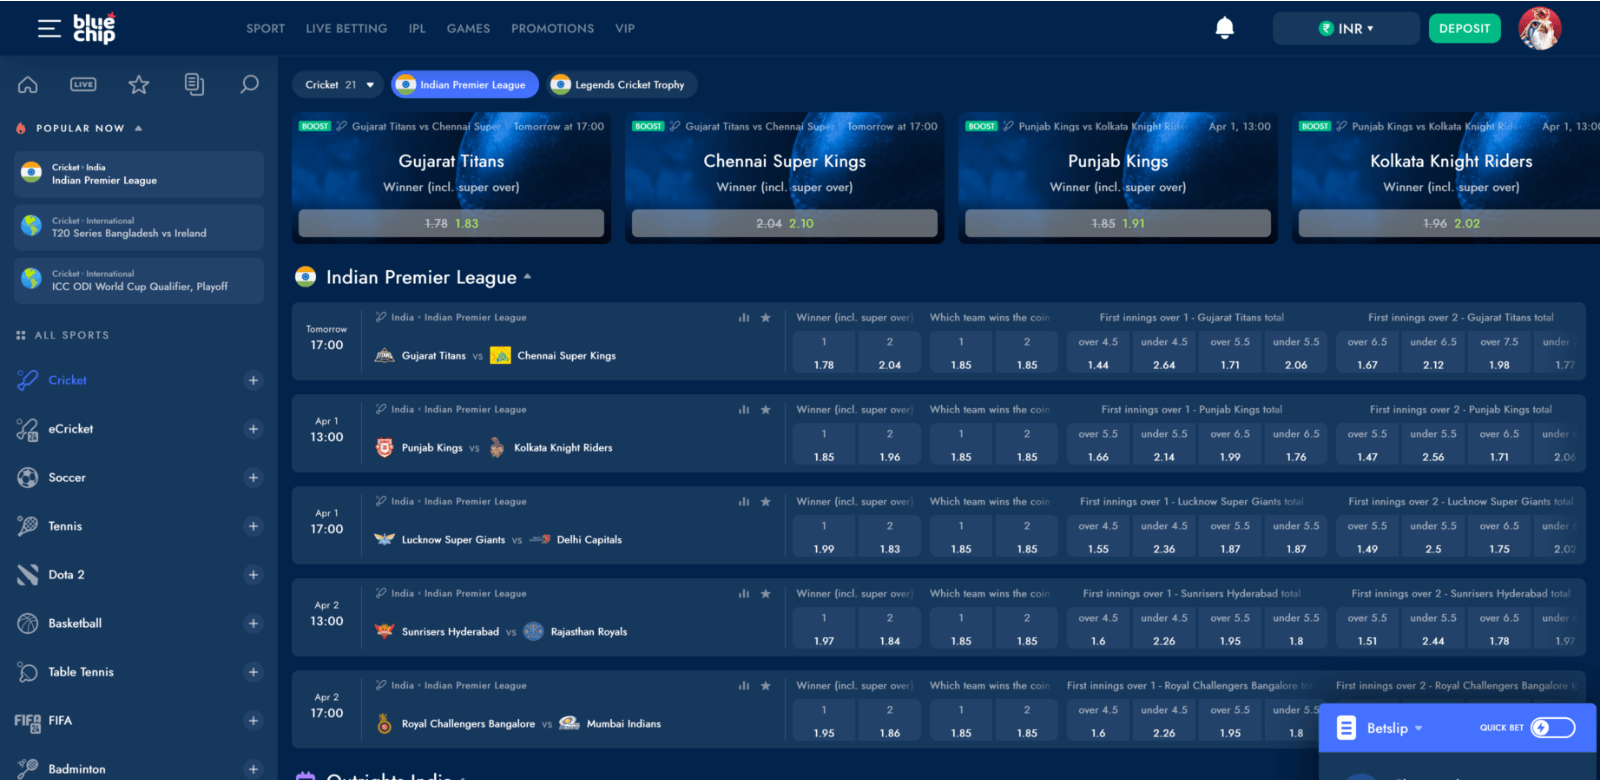 Indian users can bet on IPL matches on the Bluechip platform